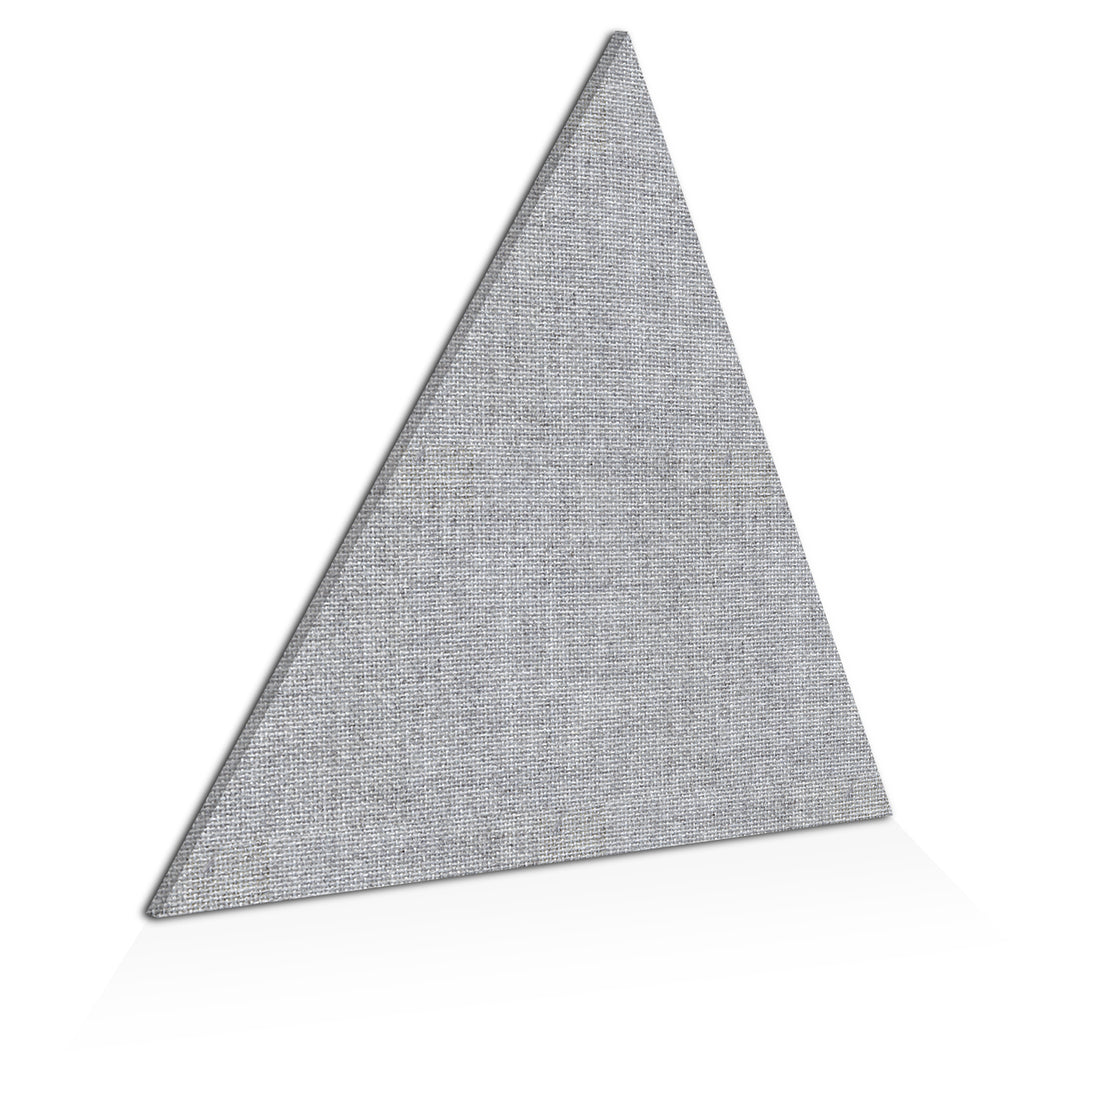 Acoustic Design Works Acoustic Panel Equilateral Triangle 1" - 1 piece